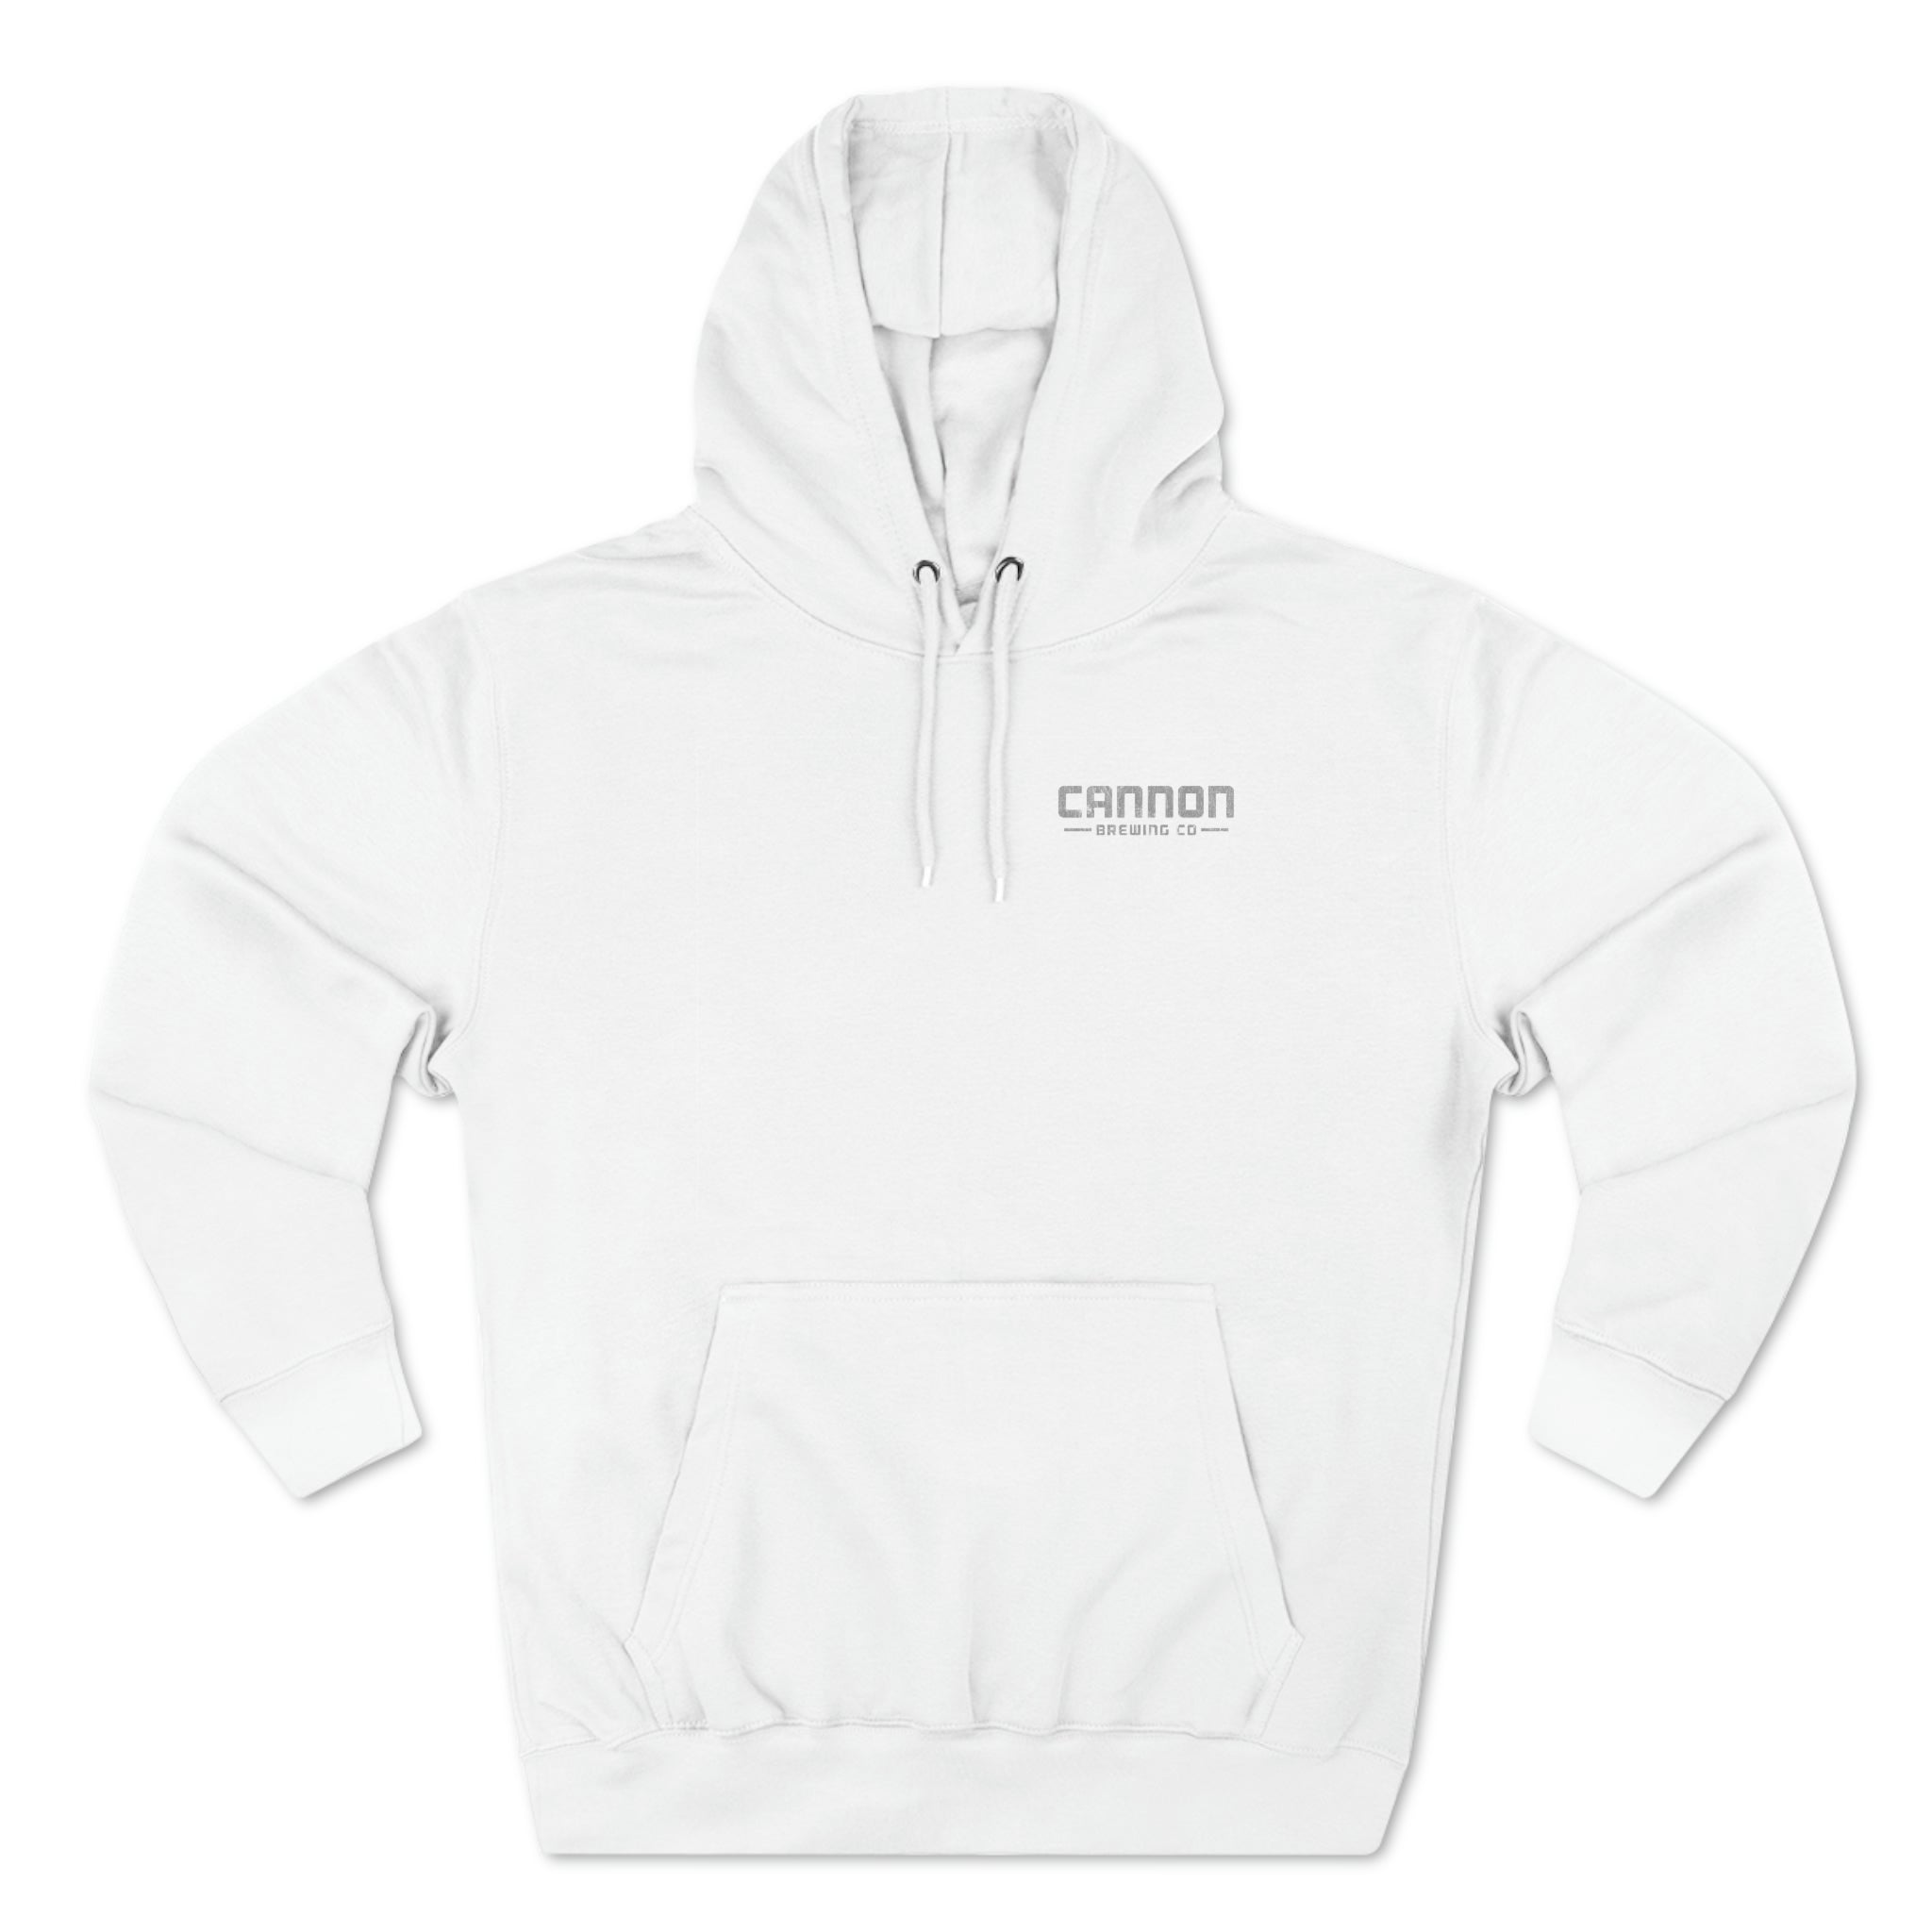 Cannon - white on dark or gray on white - 80% cotton medium-heavy pullover hoodie